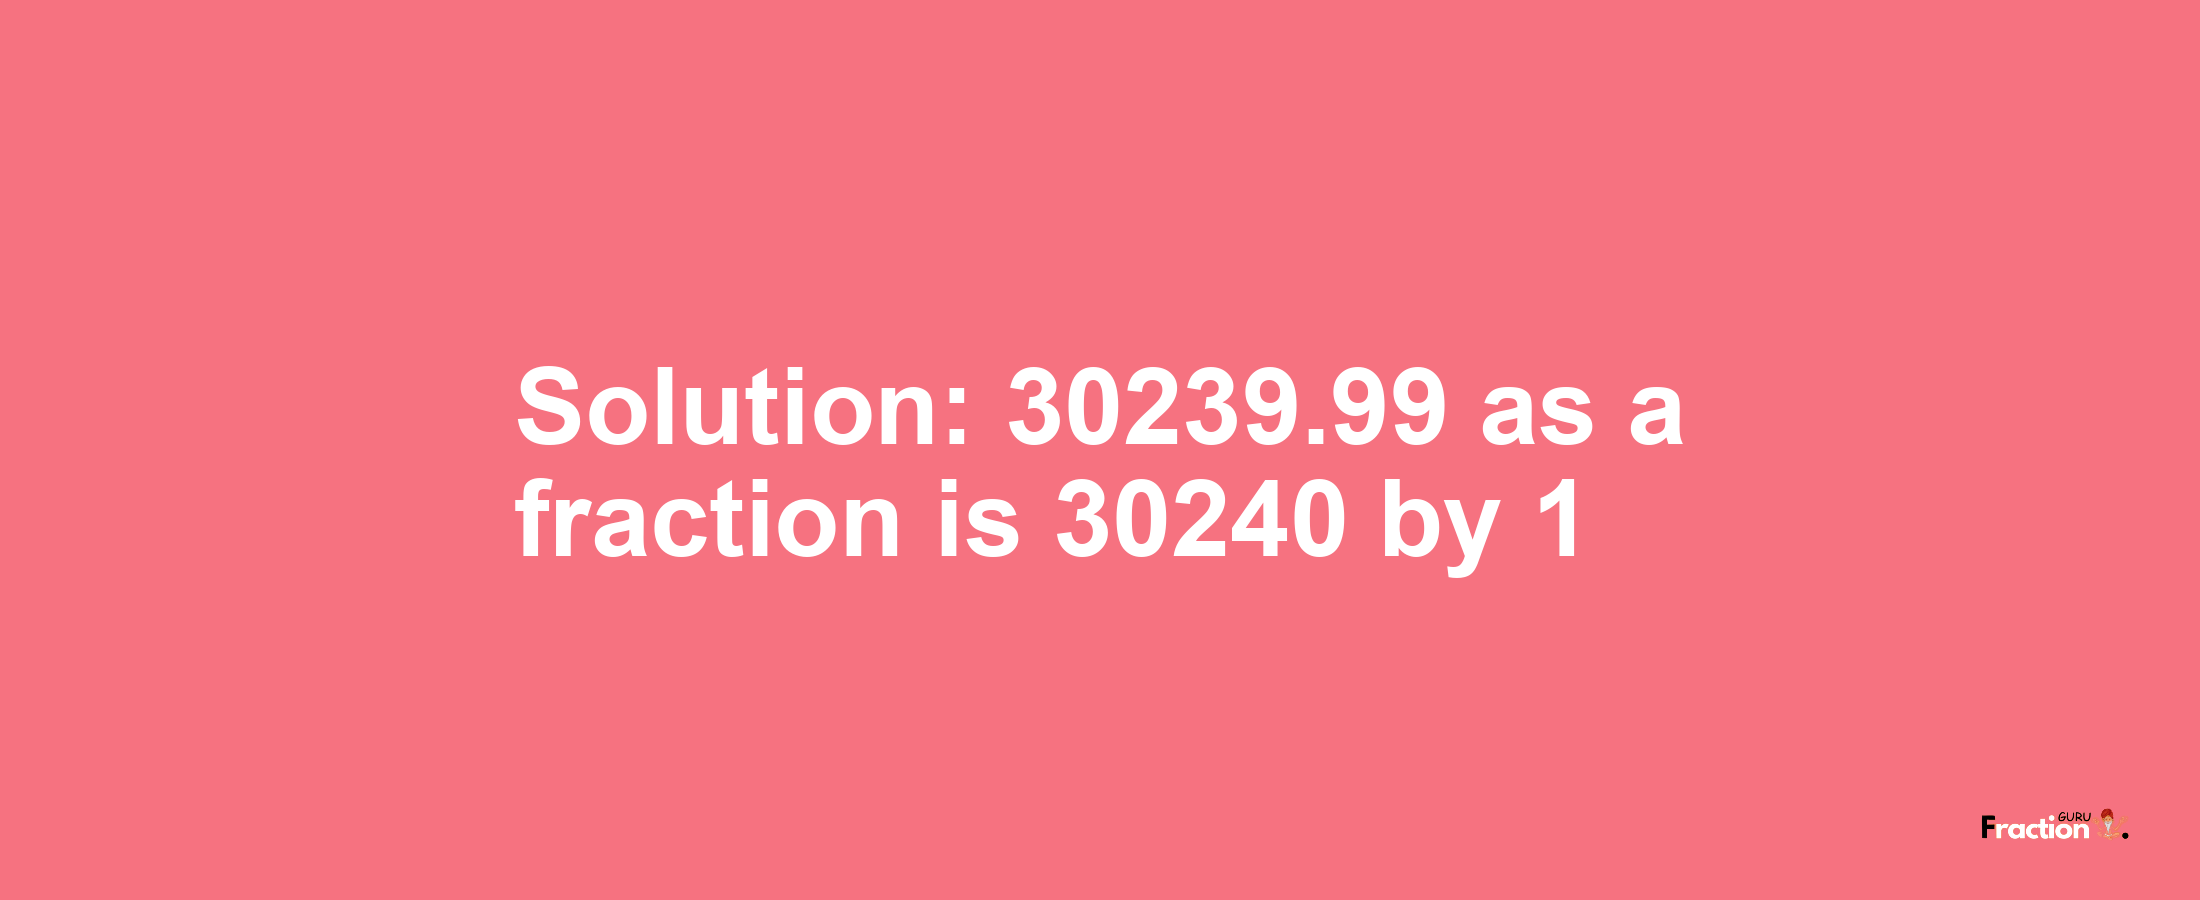 Solution:30239.99 as a fraction is 30240/1